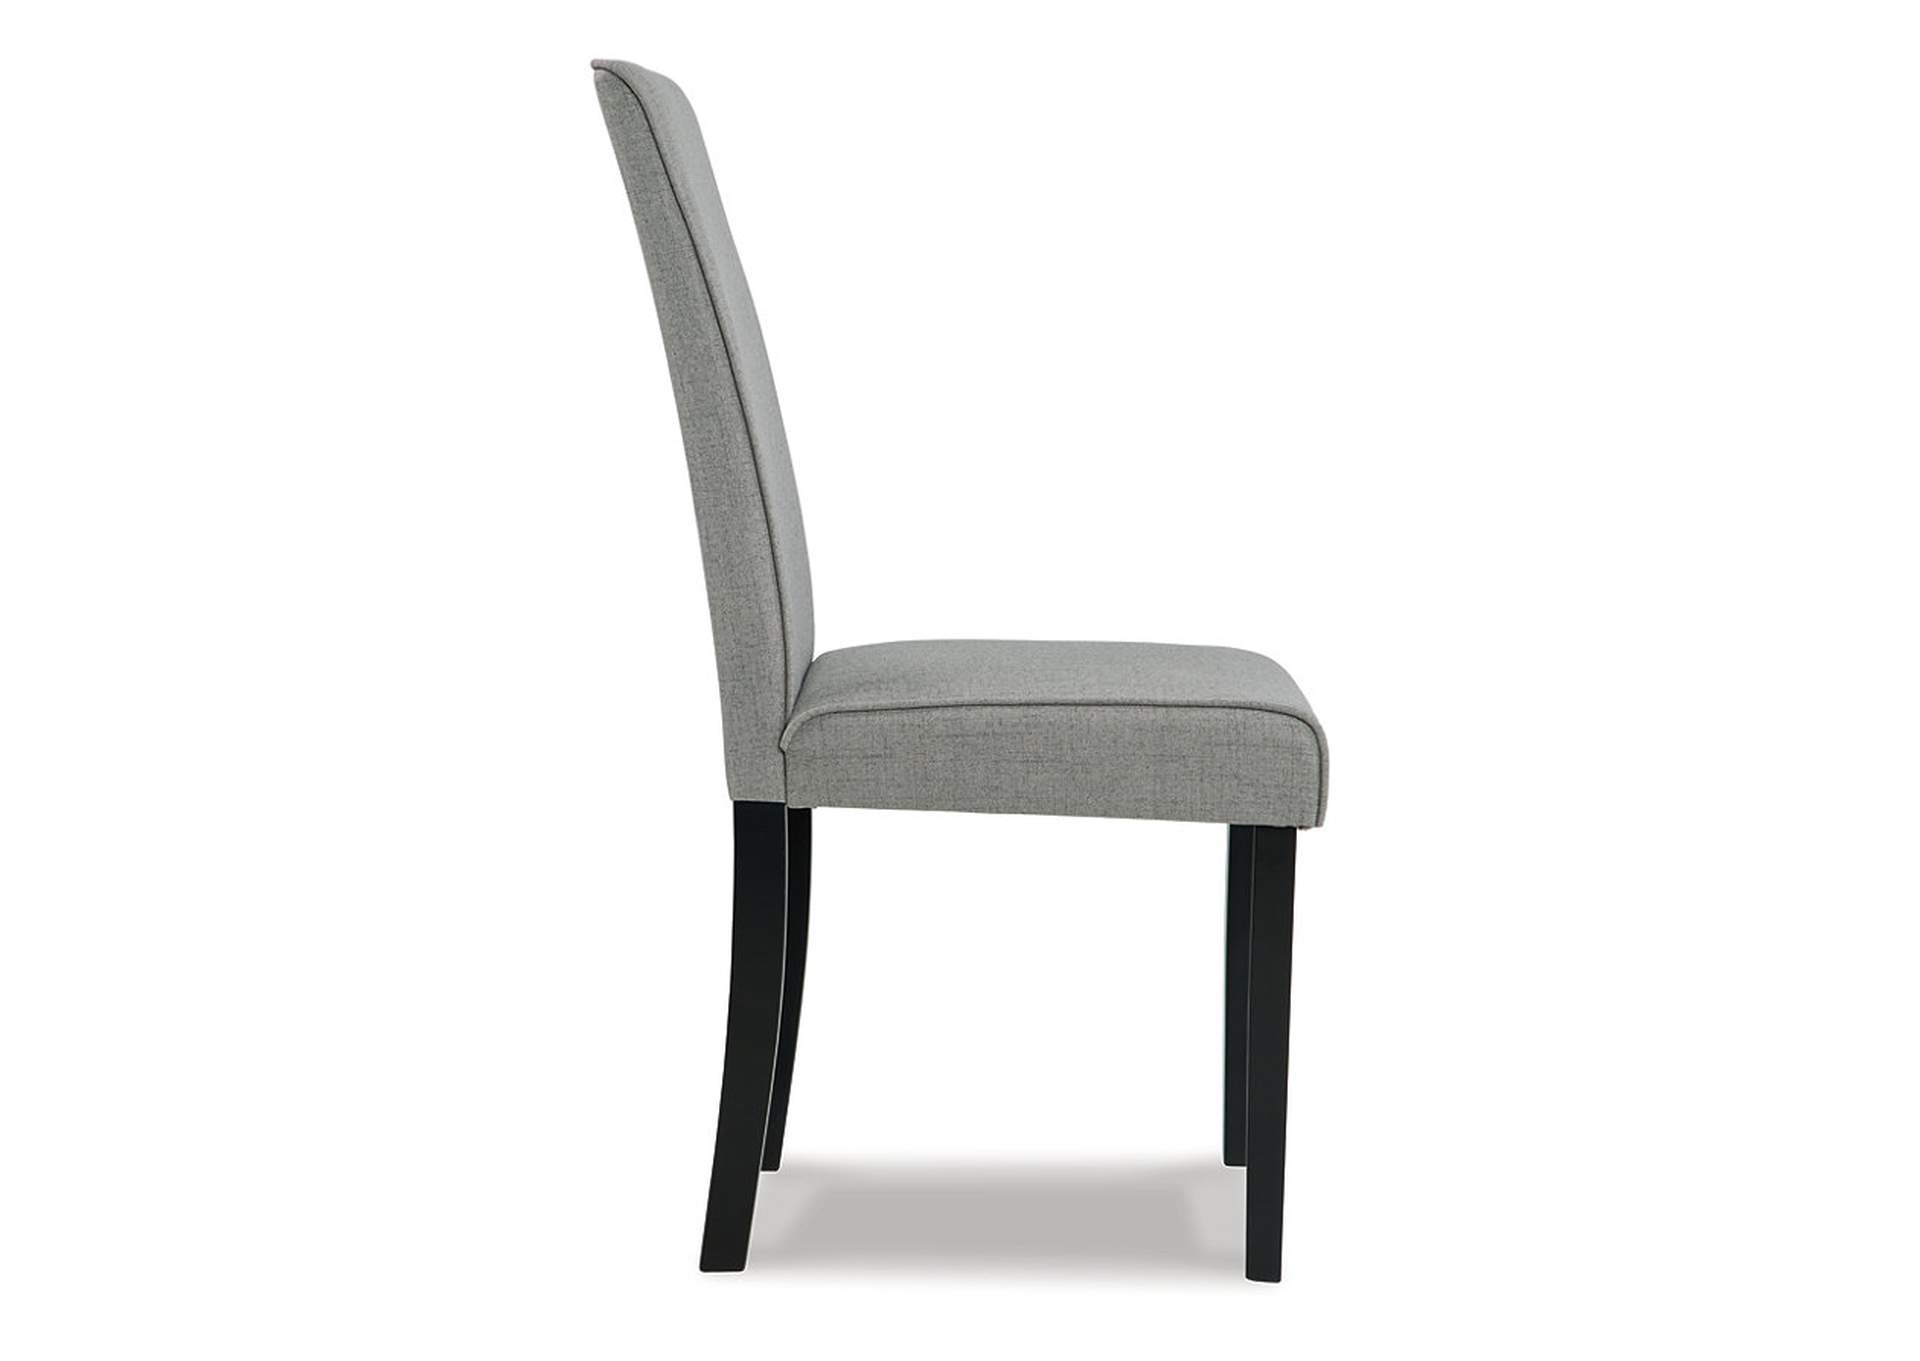 Kimonte 2-Piece Dining Room Chair,Signature Design By Ashley